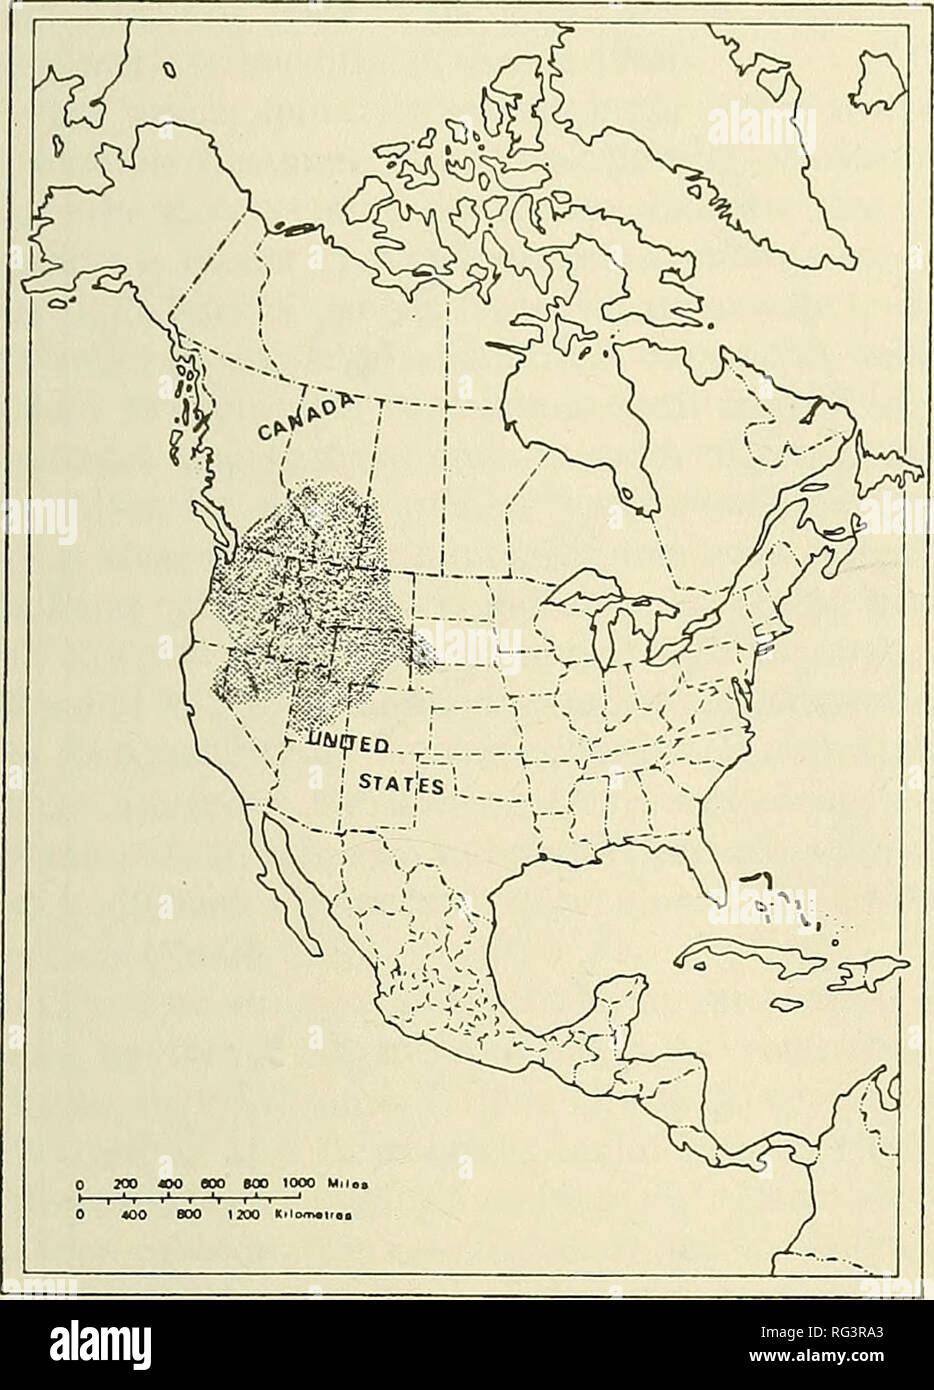 . The Canadian field-naturalist. 1992 Campbell: Status of the Mountain Sucker 29. Figure 2. Approximate North American range of the Mountain Sucker, Catostomus platyrhynchus. Saskatchewan; upper Missouri River drainage, Montana and Wyoming, and the Black Hills, South Dakota; White River and formerly, possibly, the Niobrara River, Nebraska&quot; (Smith 1966: 60-62). In Canada, the species has been reported from the South Saskatchewan River in Saskatchewan and Alberta; the Milk River drainage in the Cypress Hills region of Alberta and southwestern Saskatchewan; west in southern Alberta to the Fl Stock Photo